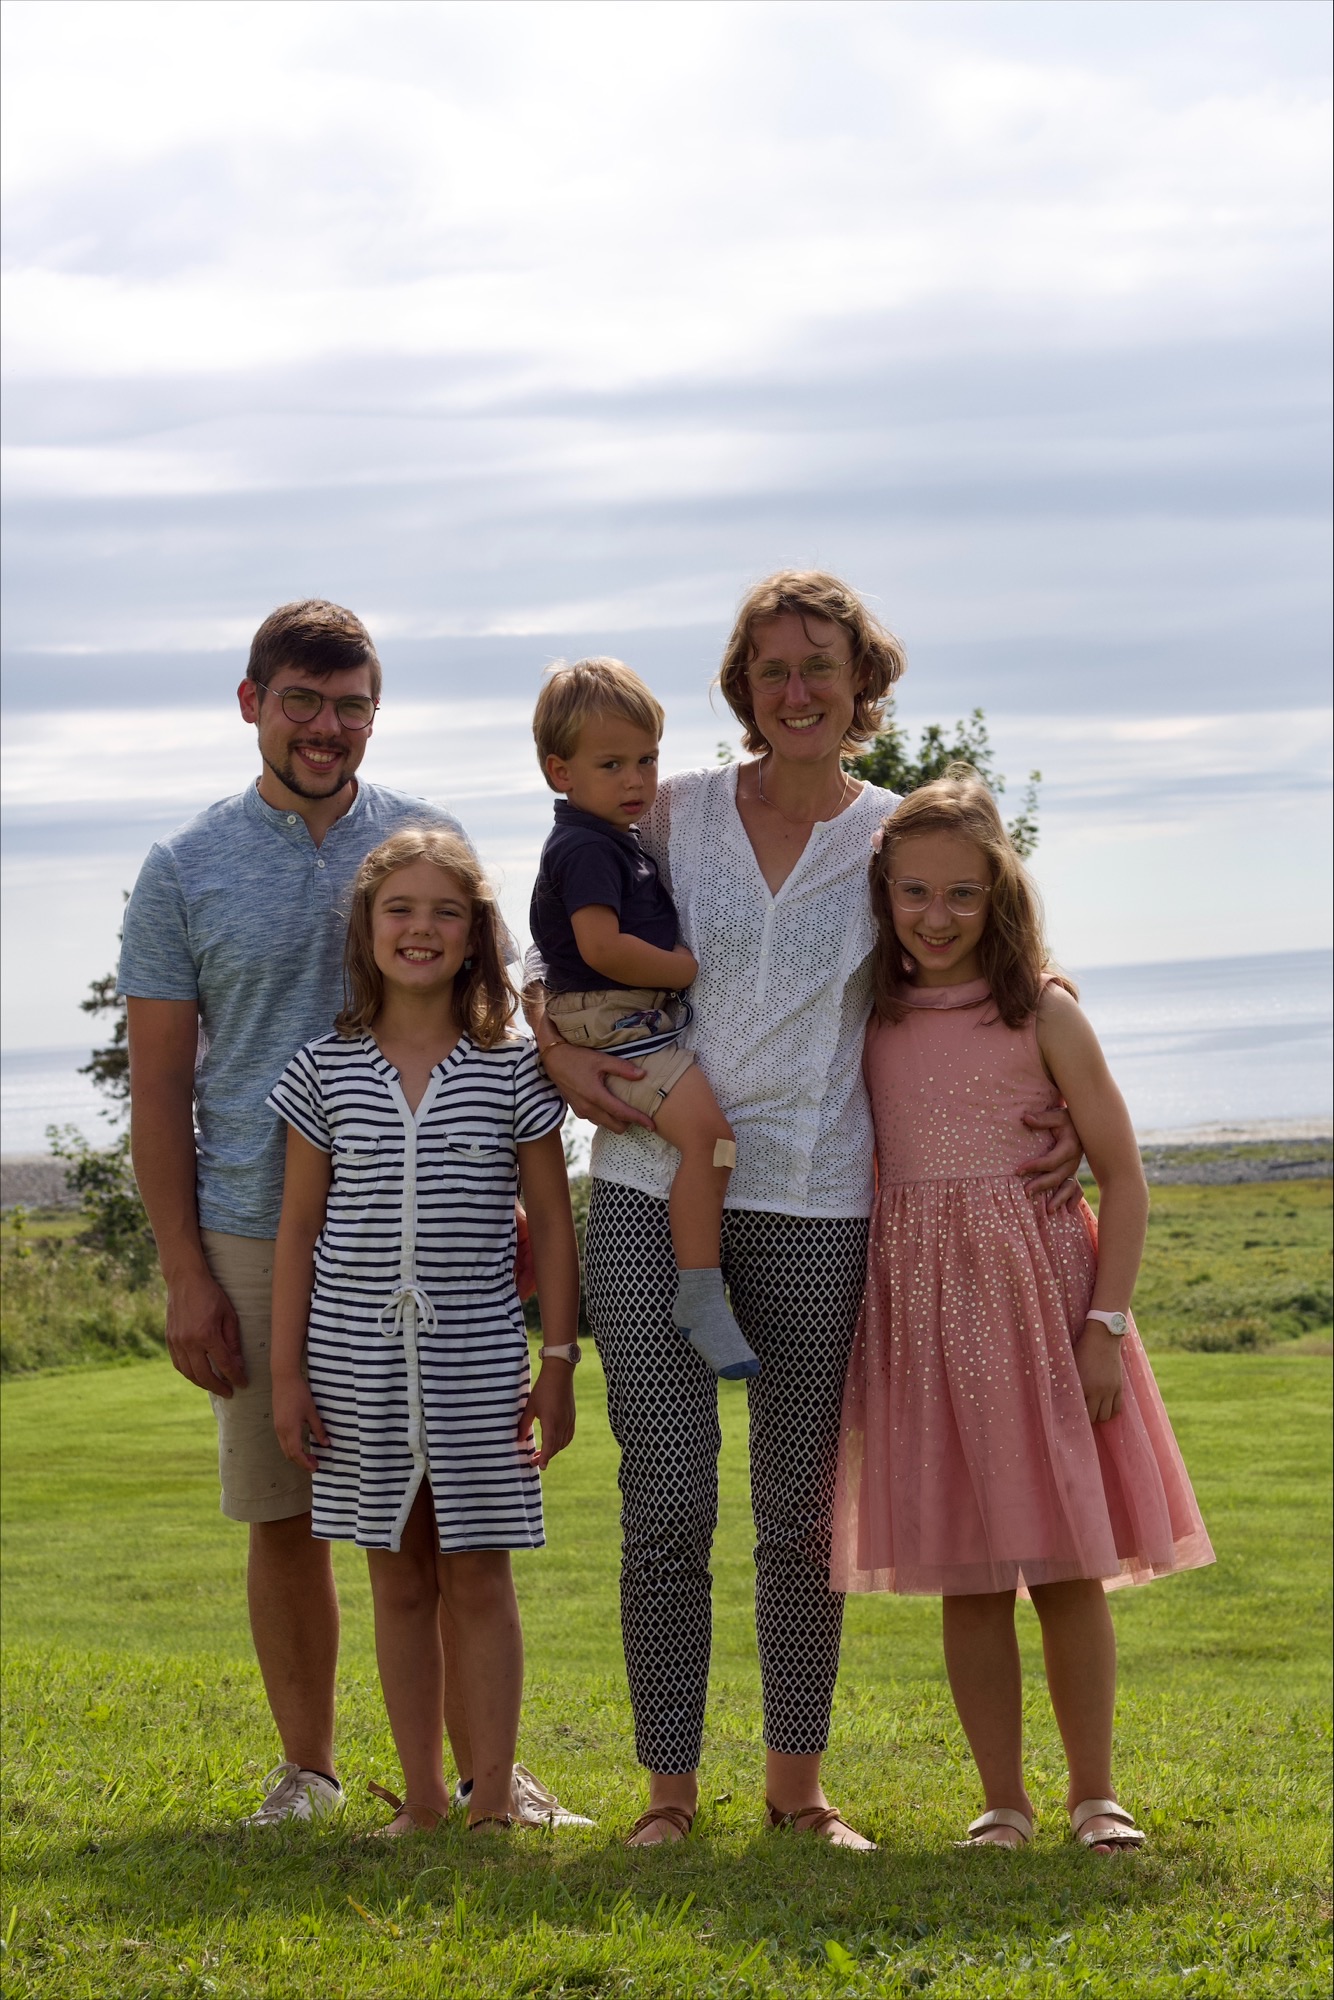 An image of a family from Belgium (a man and a woman with their three children) who immigrated to Canada and settled in Clare in front of St. Mary's Bay.